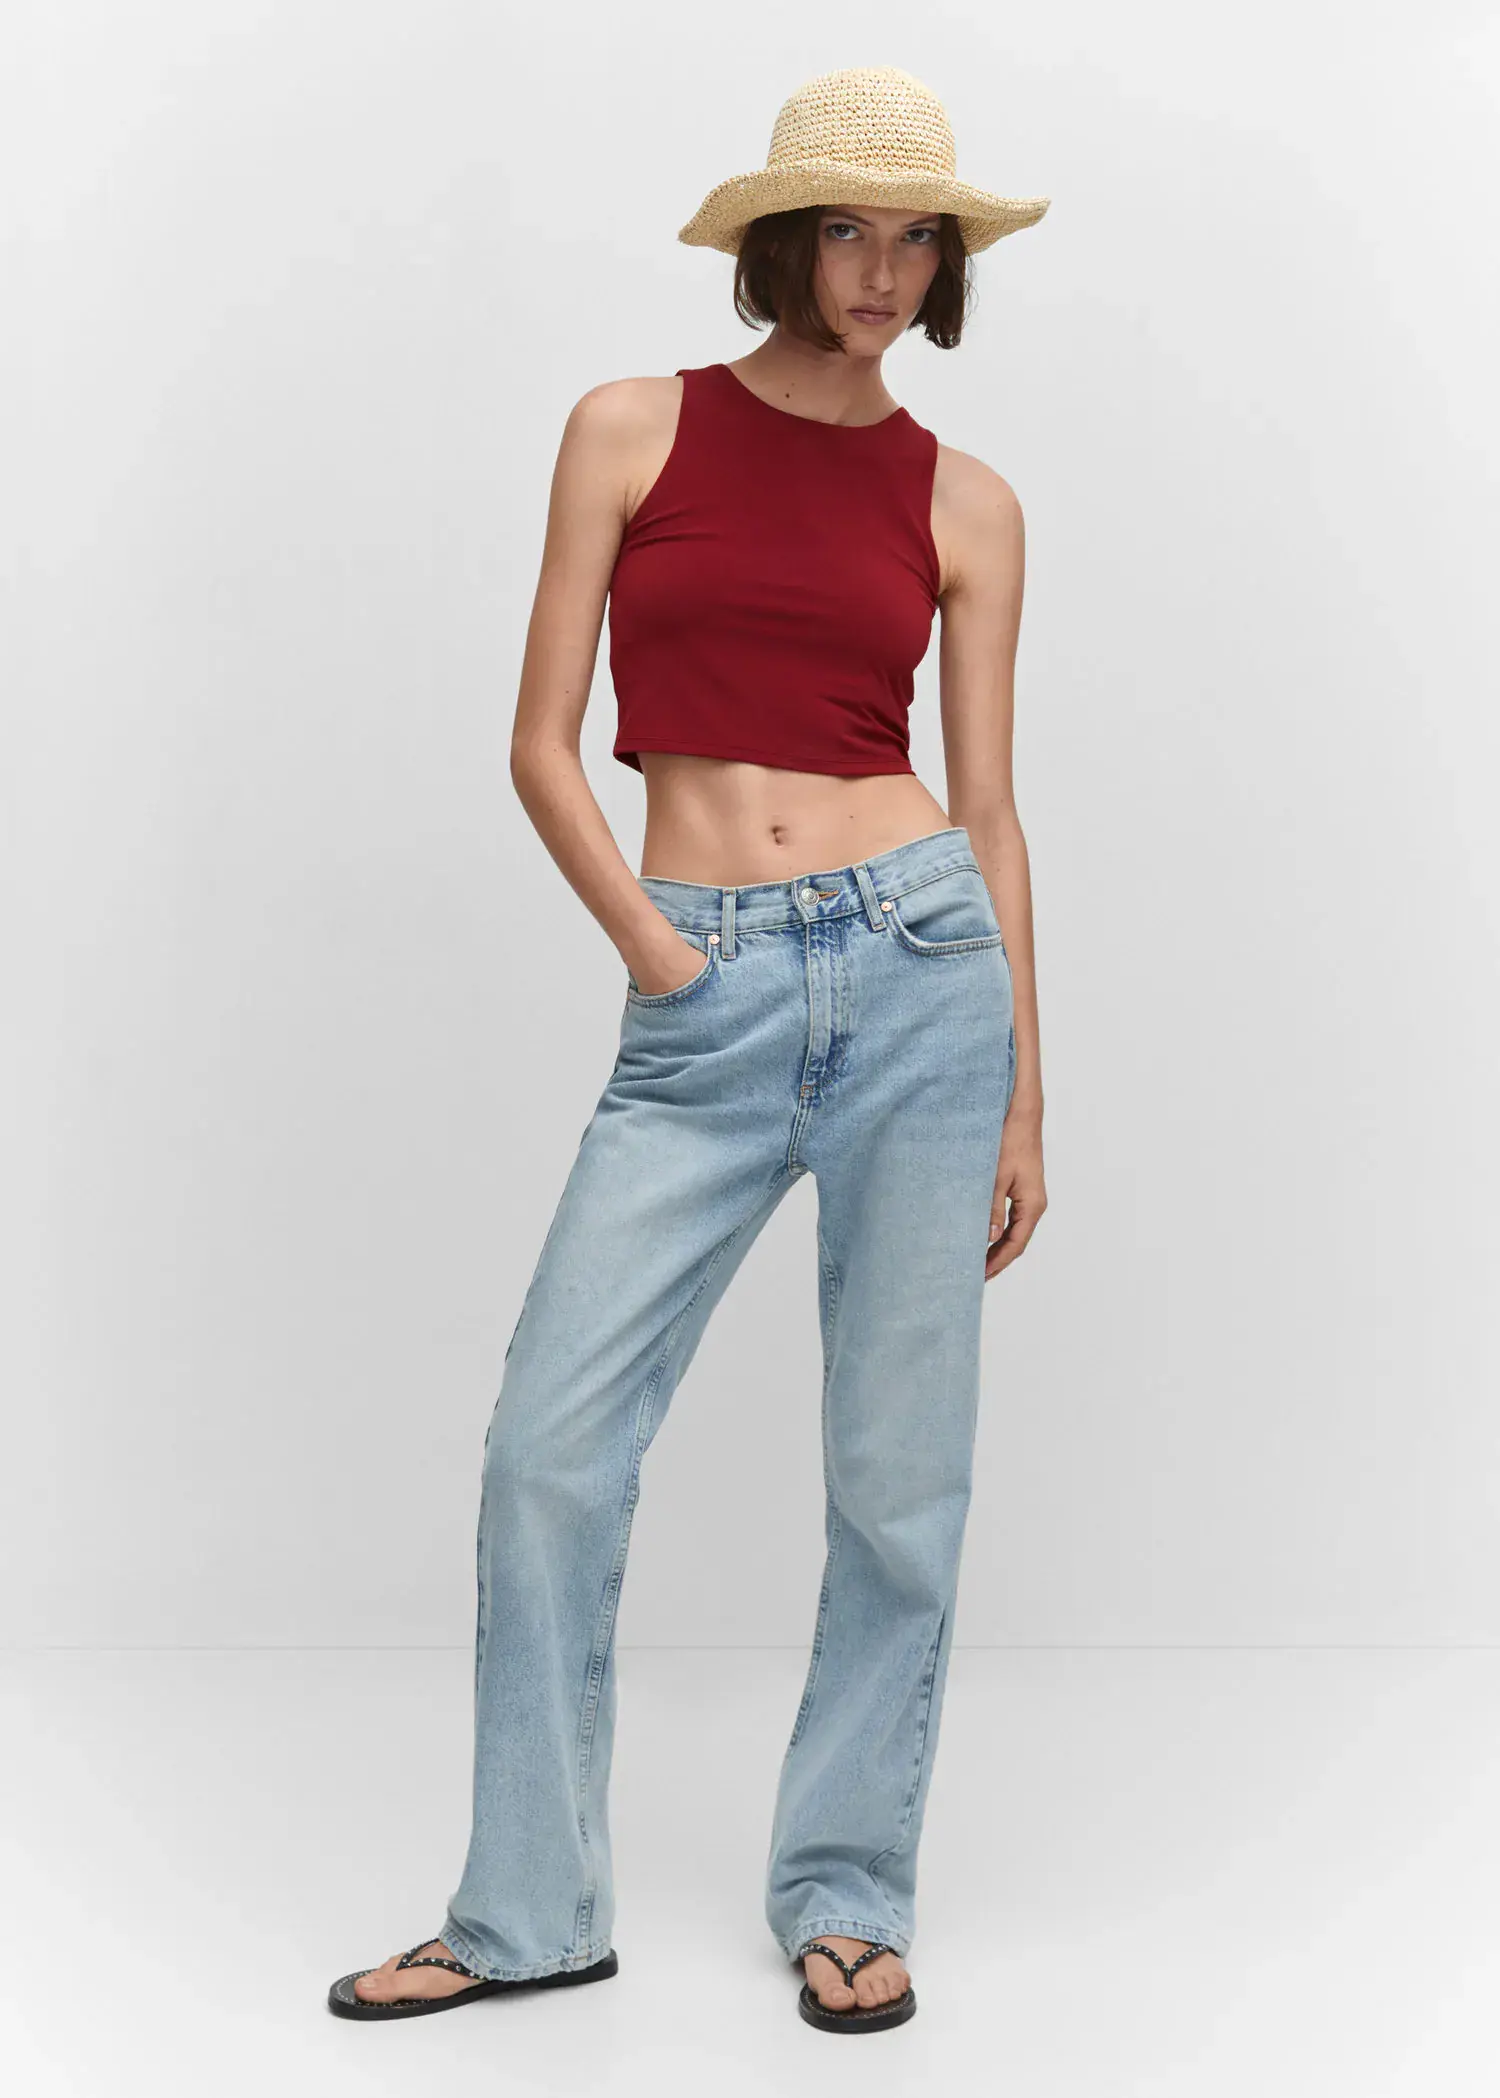 Mango Crop top with halter neck. a woman in a red crop top and blue jeans. 